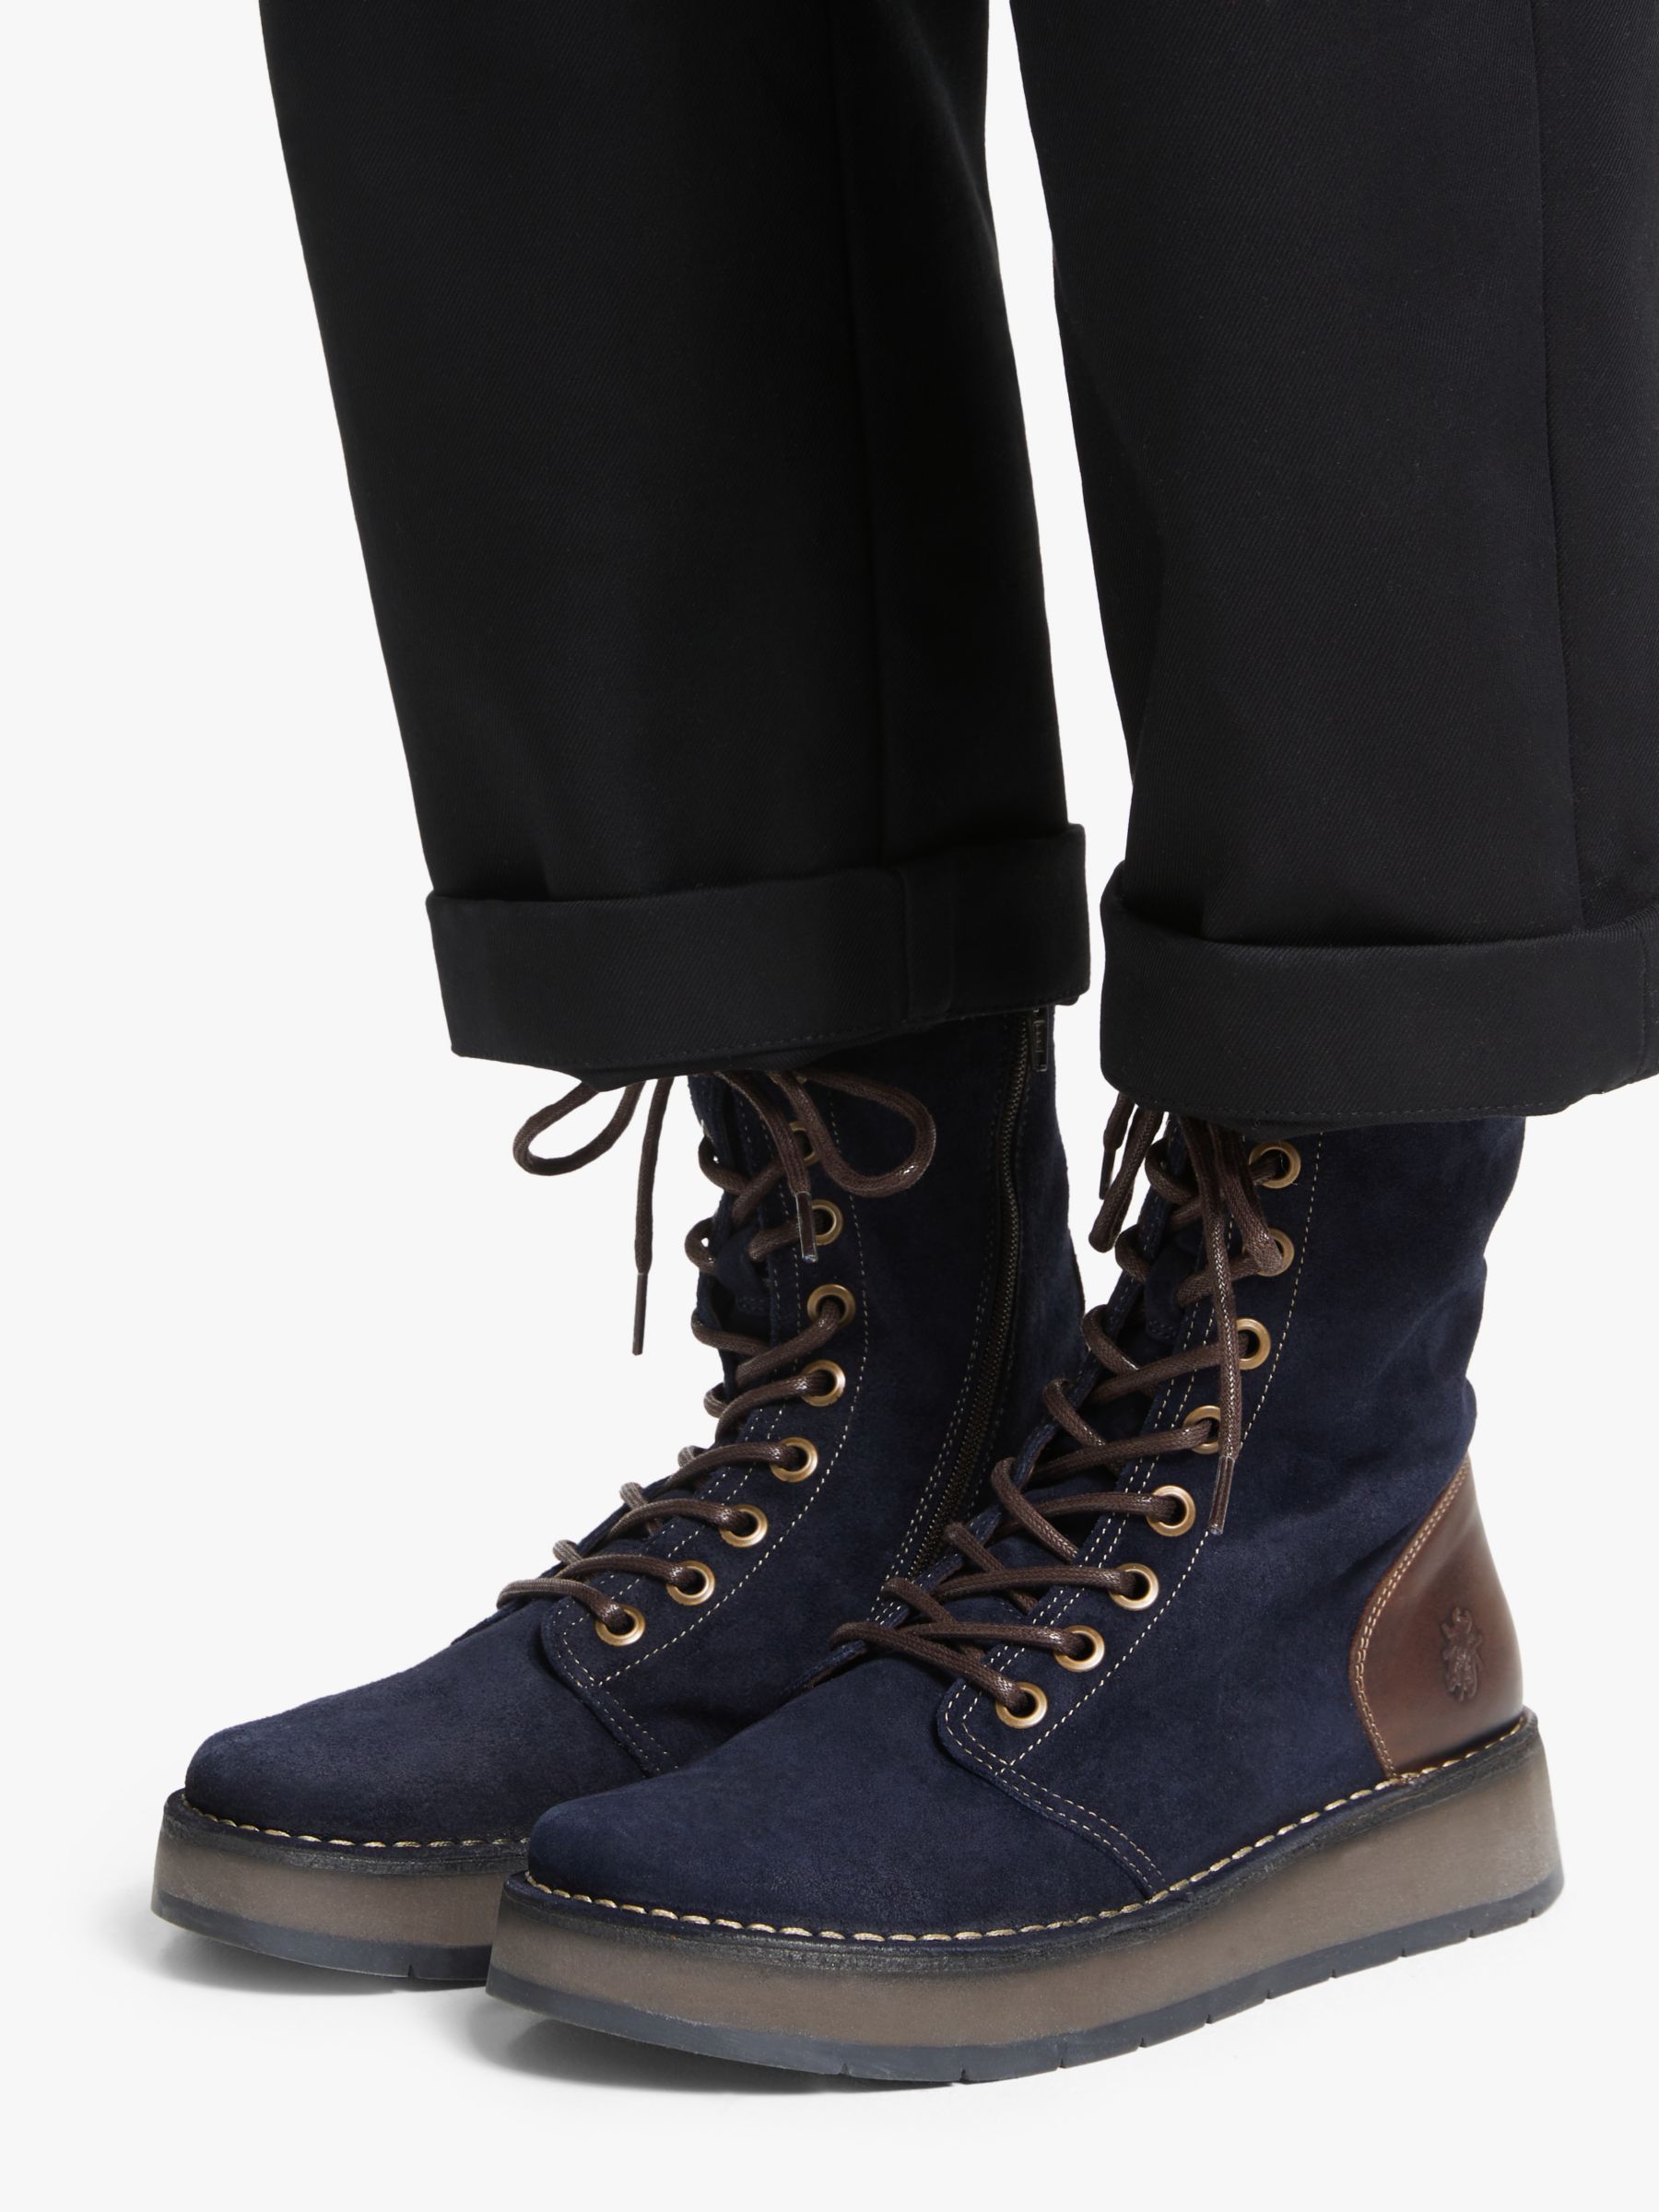 Fly London Rami Leather Ankle Boots, Navy/Dark Brown at John Lewis ...